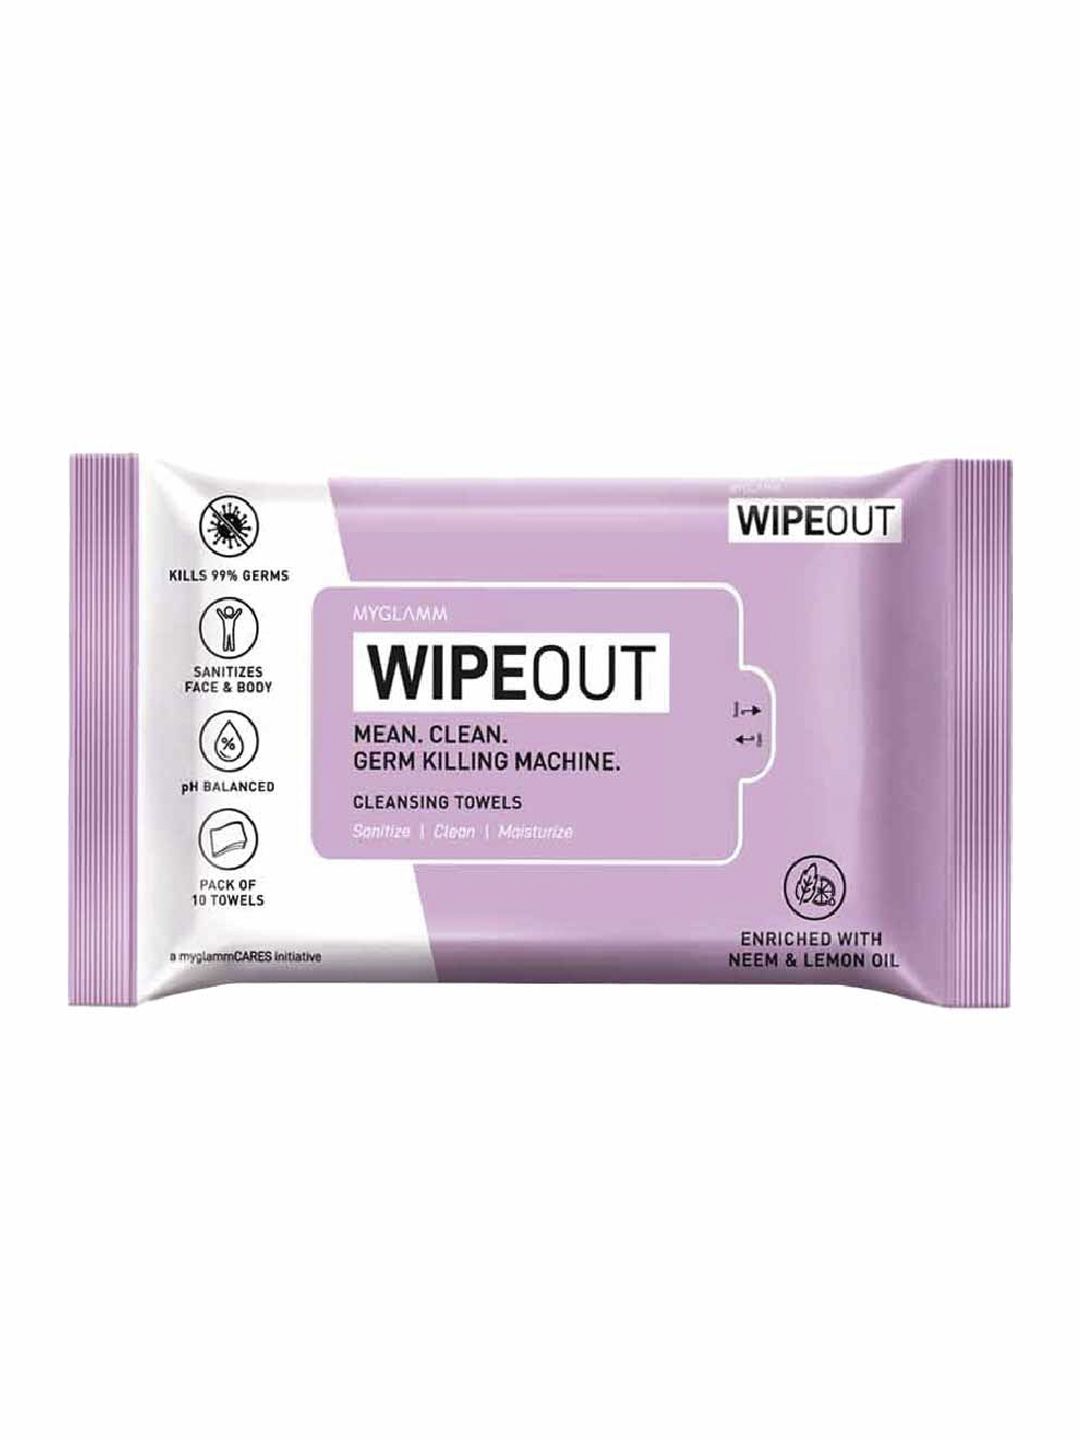 MyGlamm Wipeout Cleansing Towels - 300 Nos Price in India